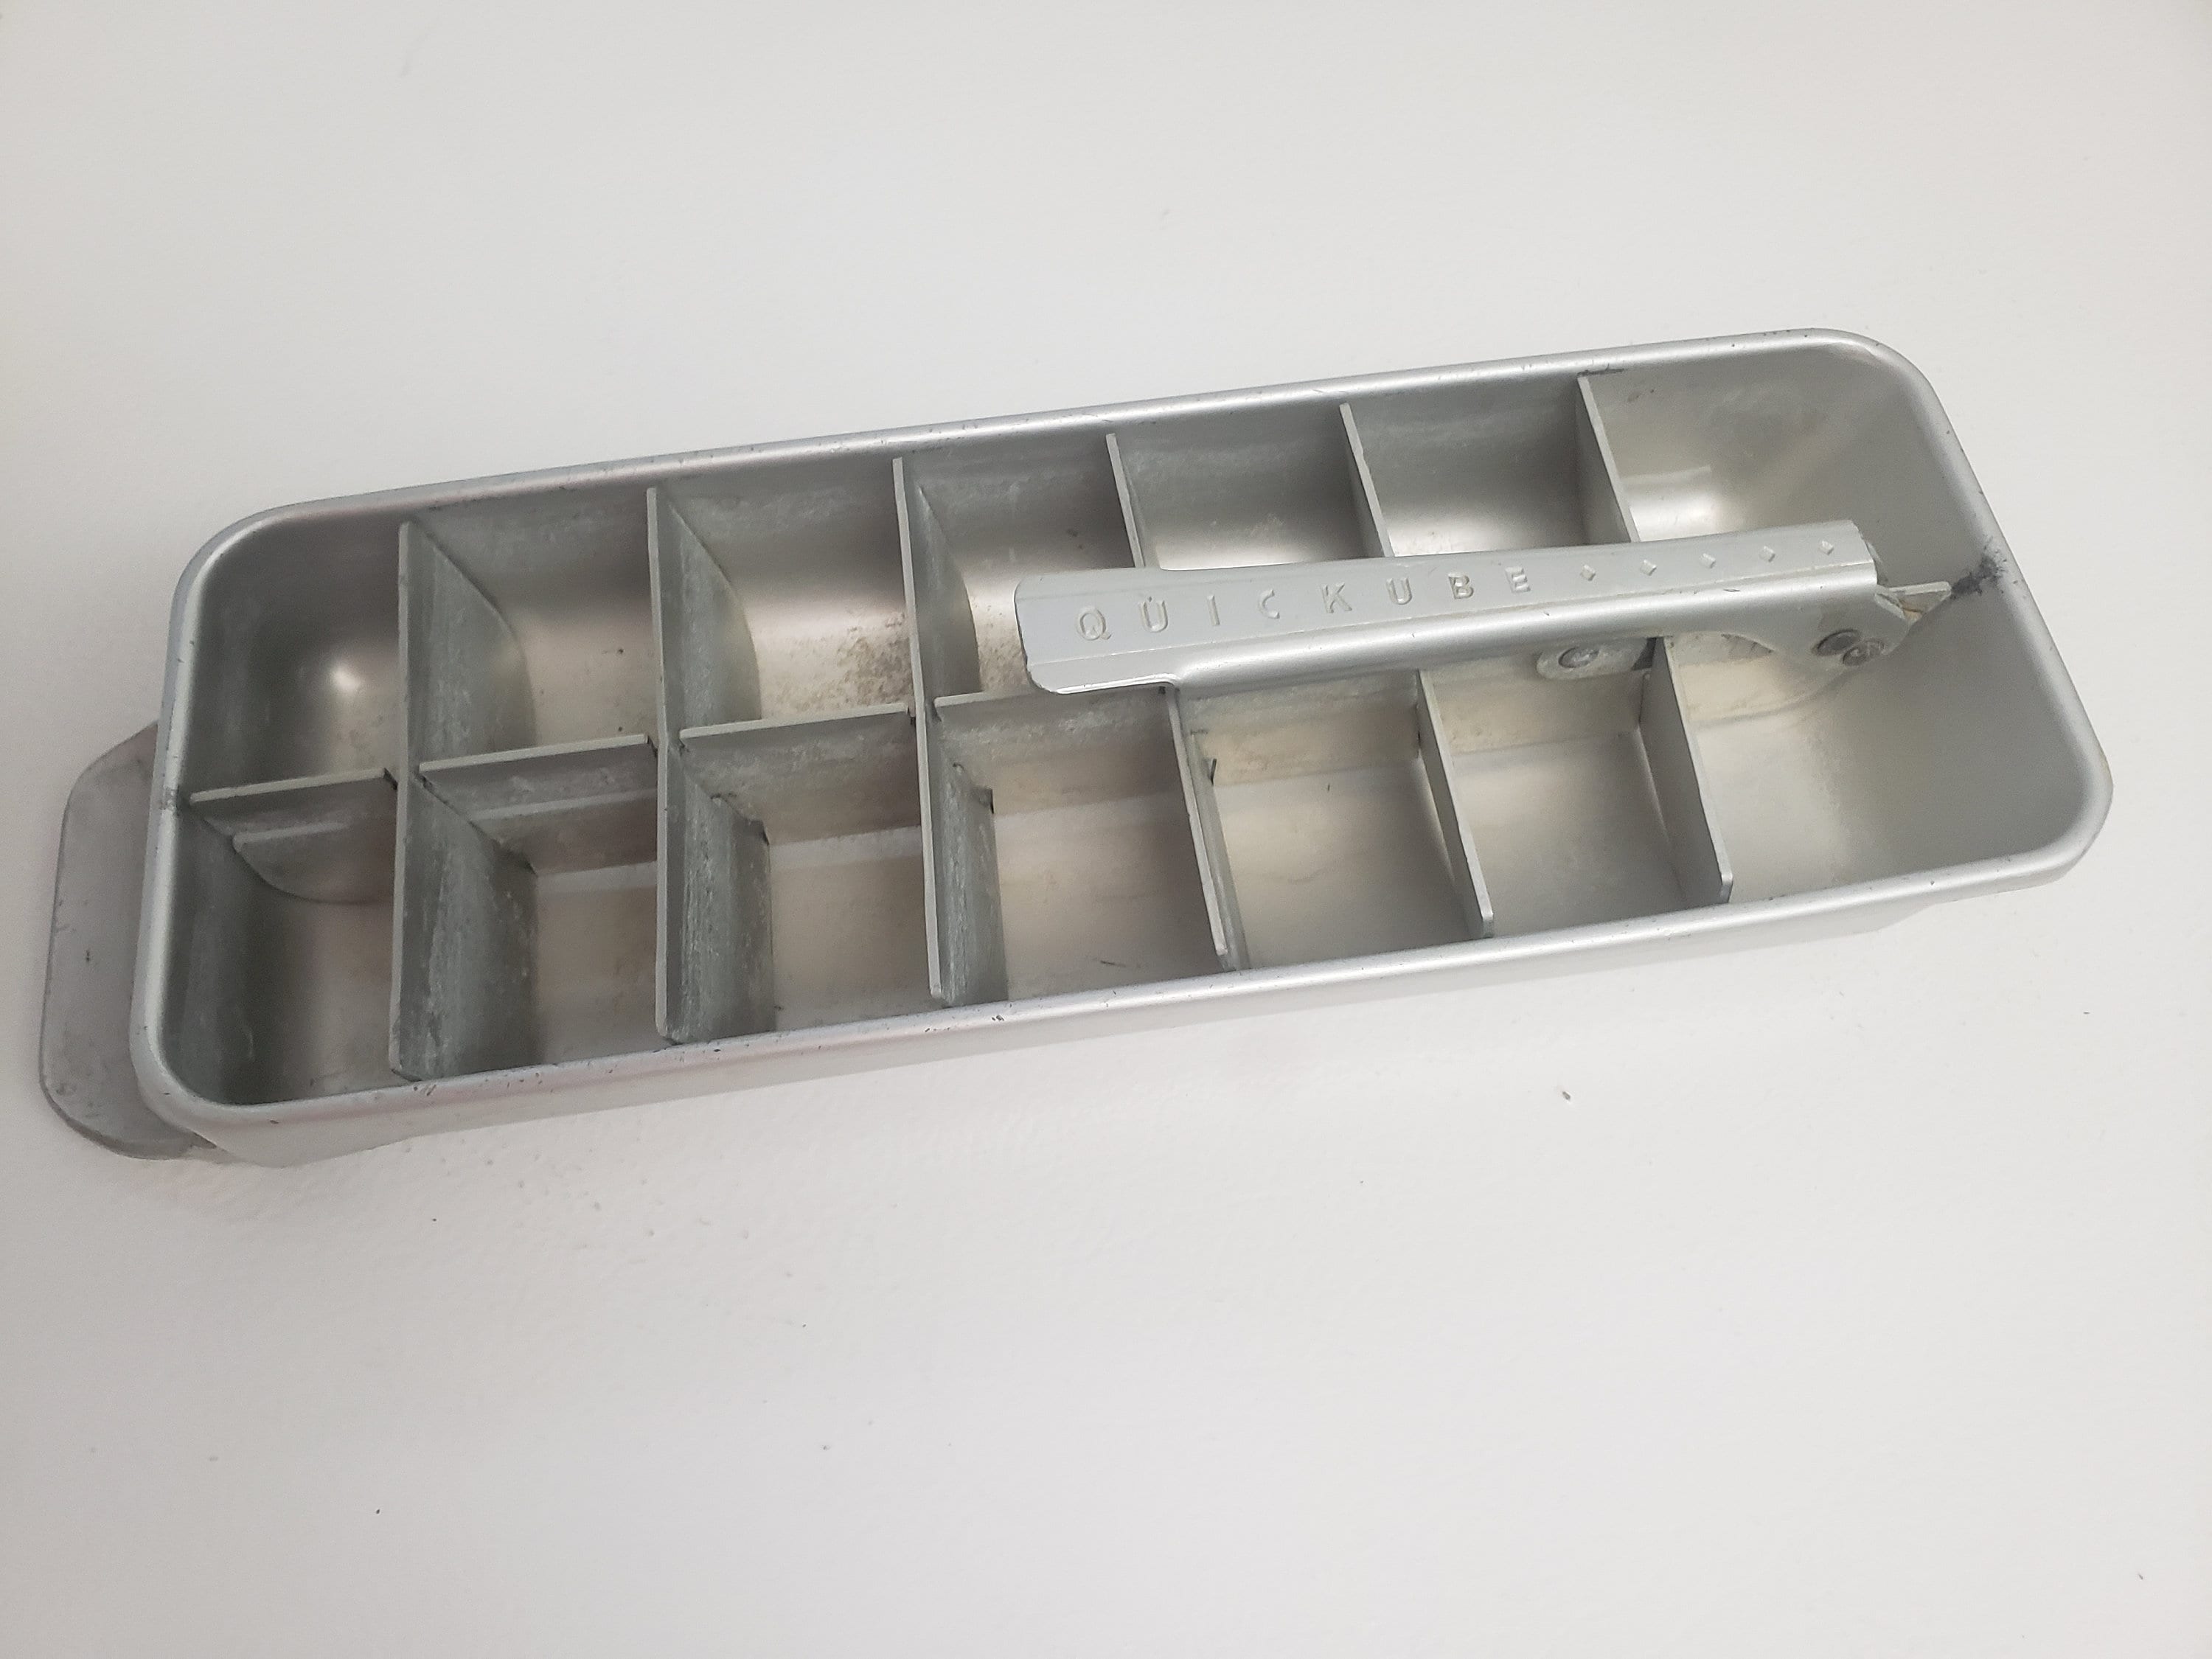 Vintage Set of Three Metal Ice Cube Tray Mold General Electric GE